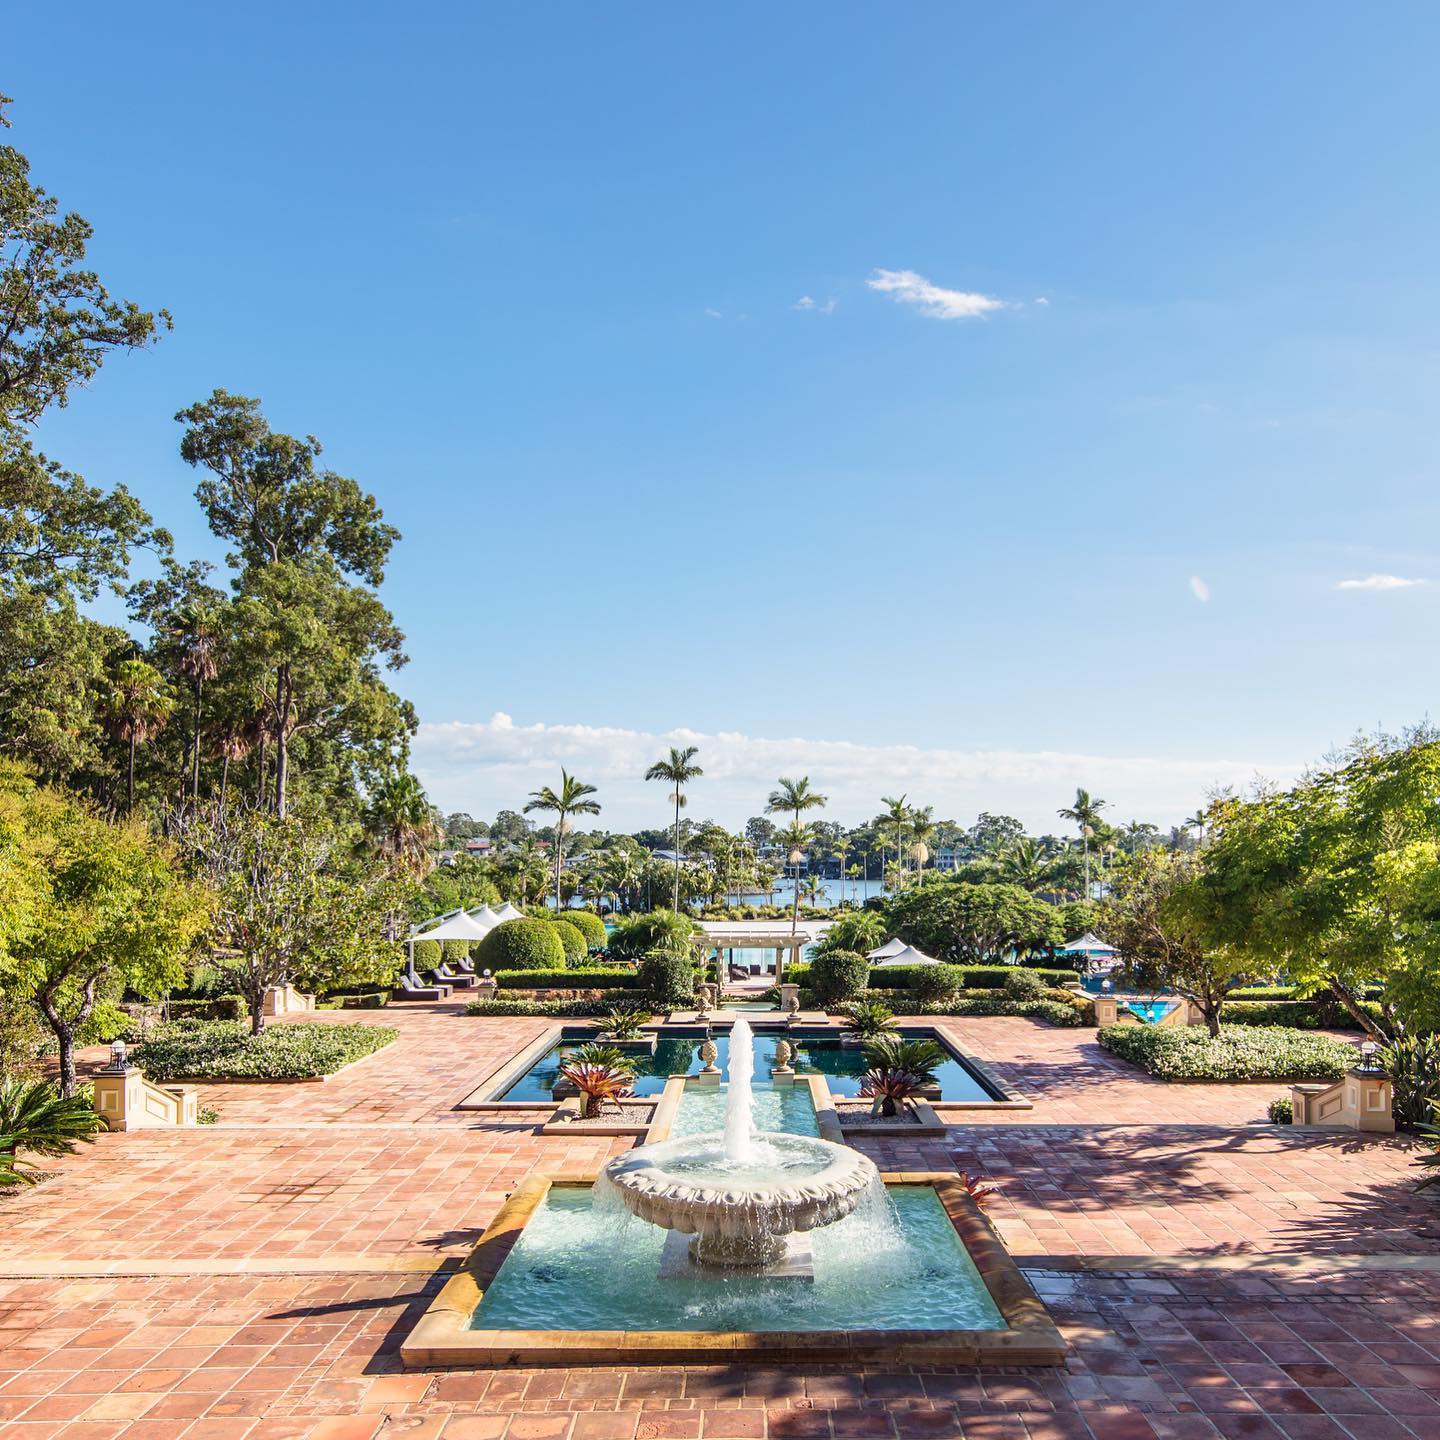 fountains outdoor in a garden area at Intercontinental Sanctuary Cove, a Queensland resort